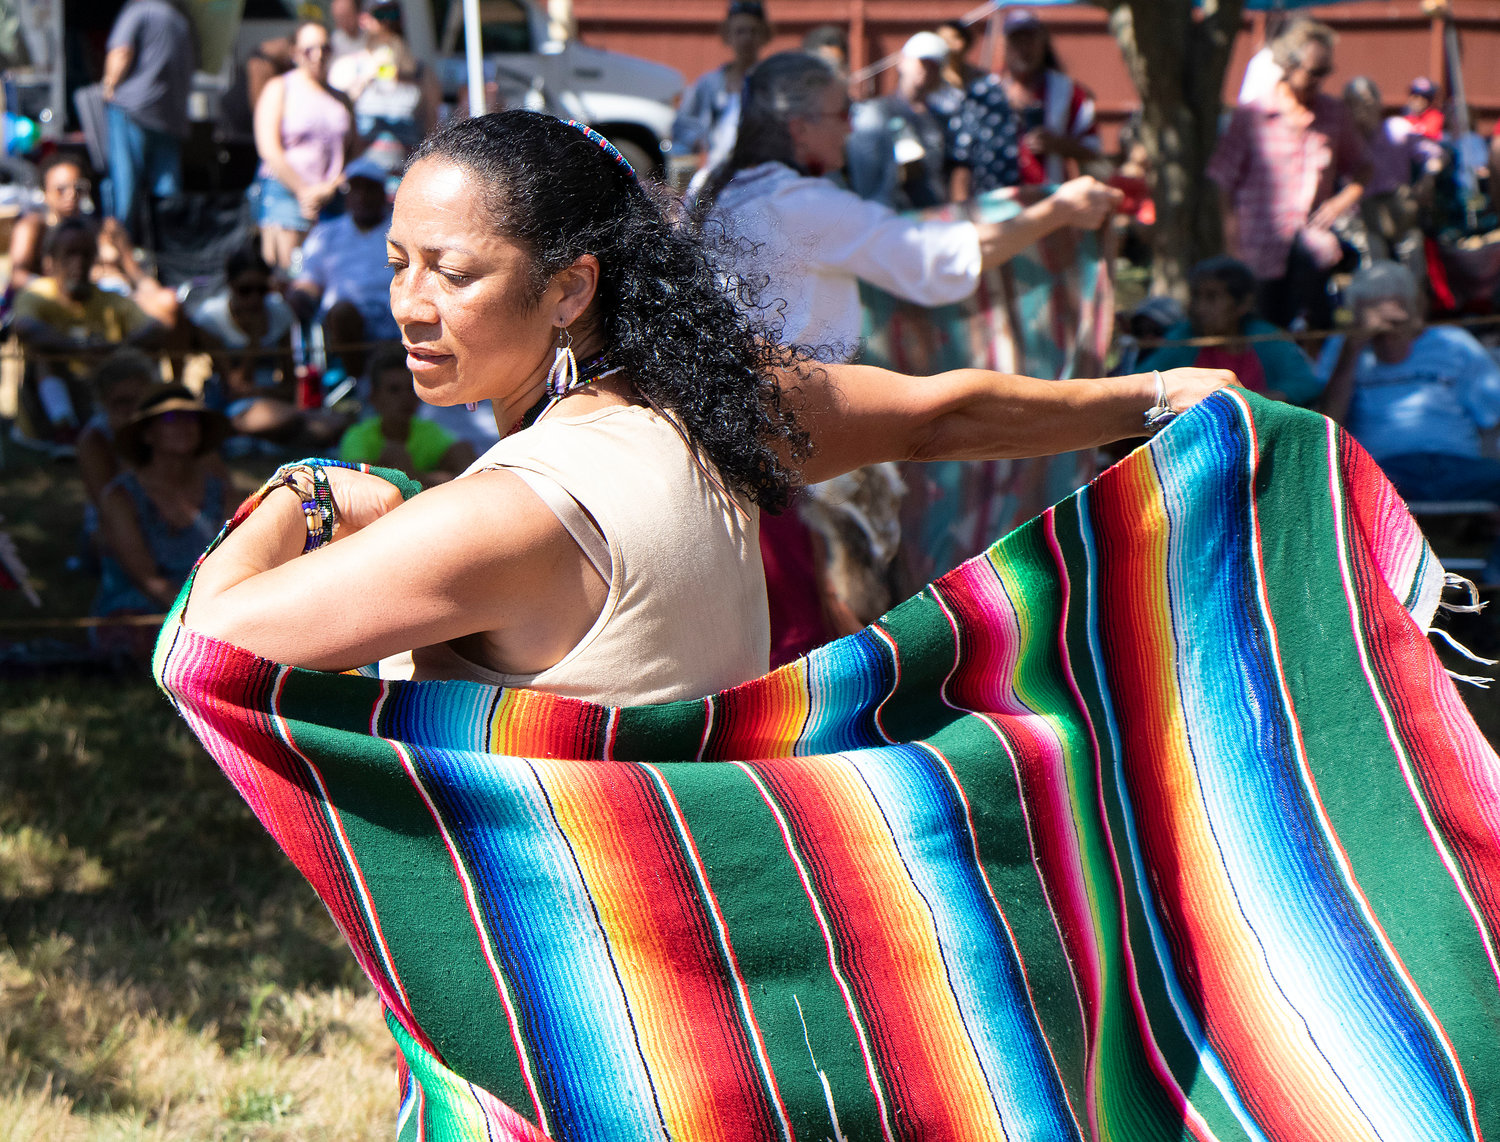 Pokanoket Sachem Chief Tracey Dancing Star Brown performs a blanket dance with other women of the tribe during Pokanoket Heritage Day at Burr’s Hill Park on Sunday. The event featured Native American singing, dancing, drumming, storytelling, presentations and displays on Pokanoket history and culture. 